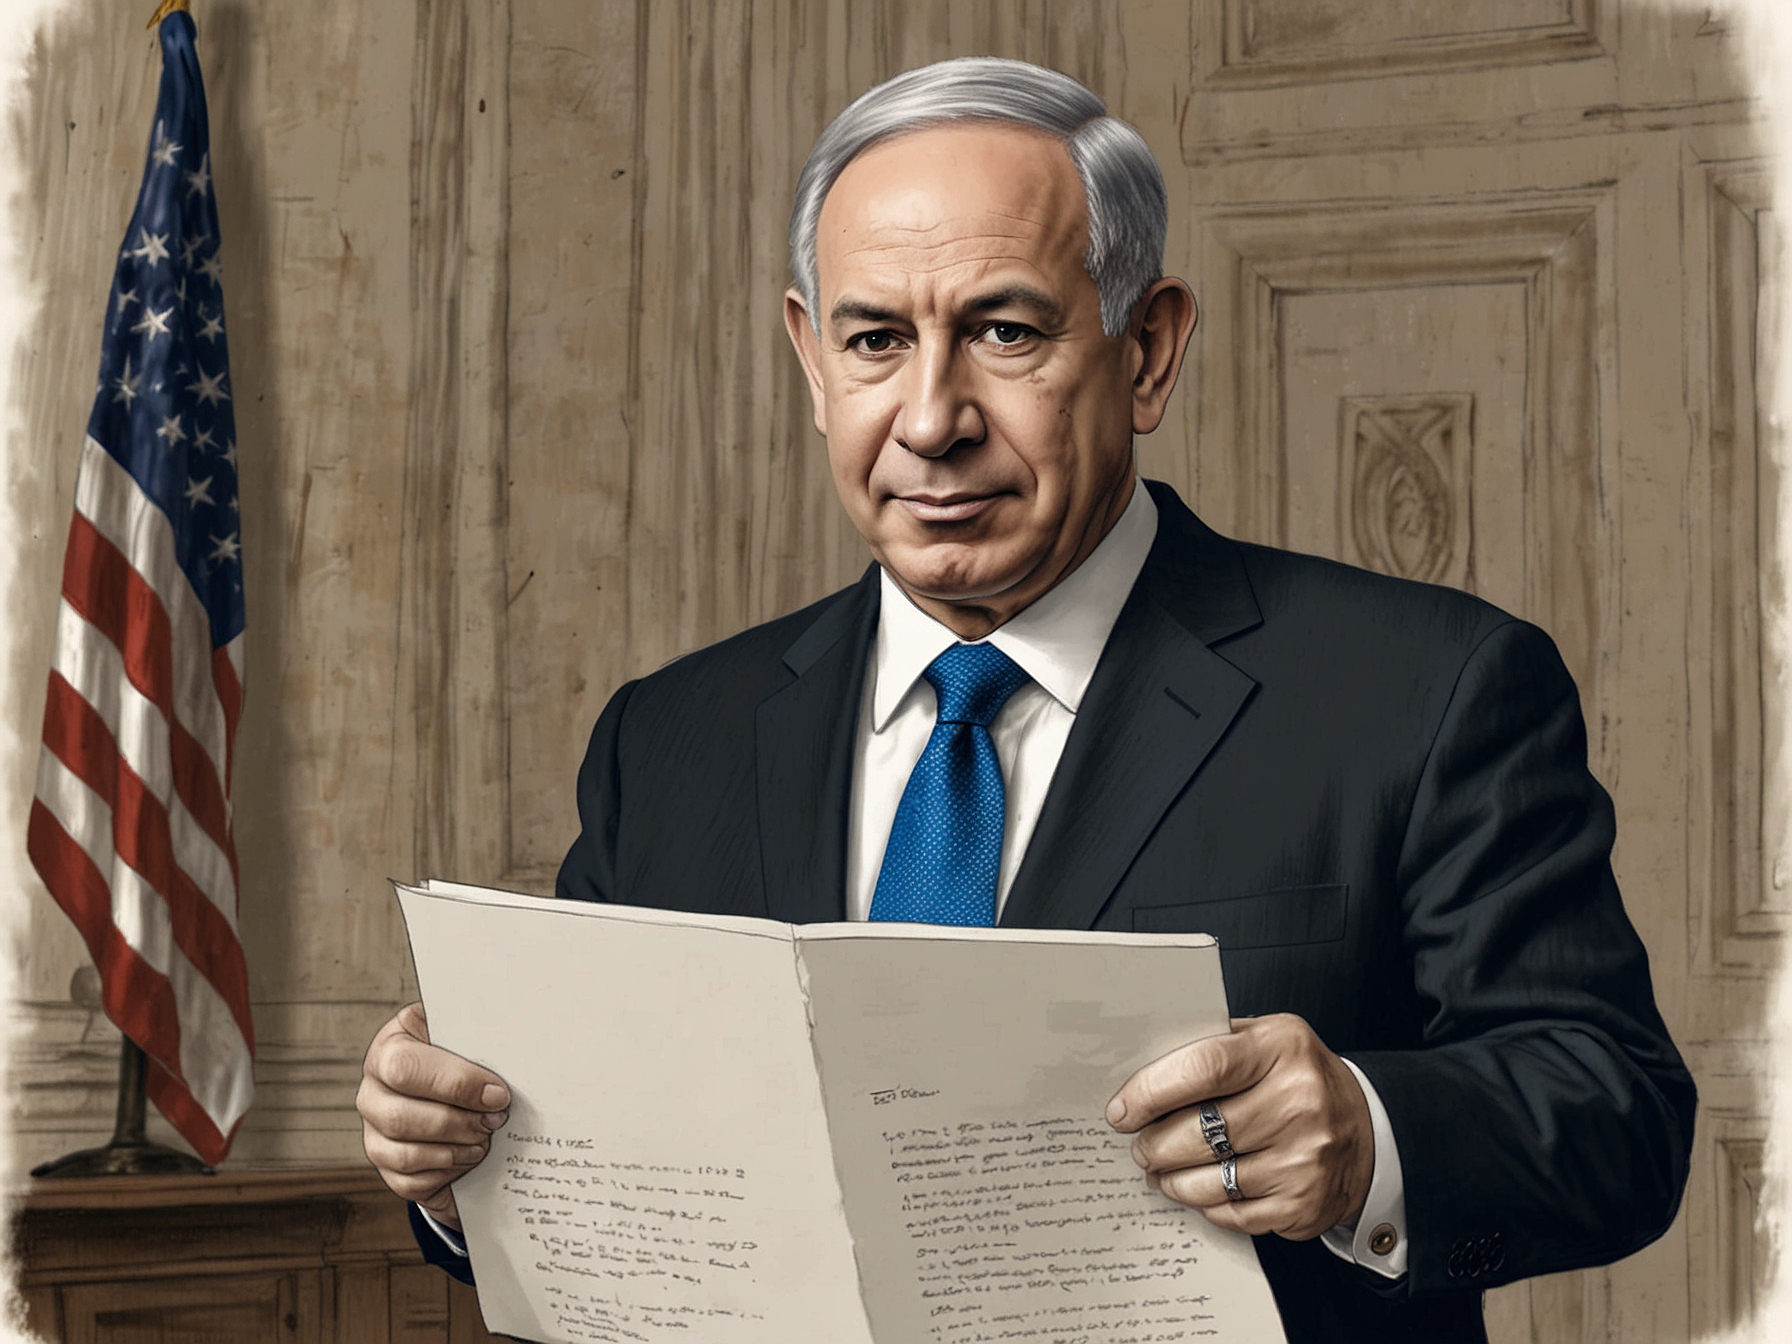 Prime Minister Benjamin Netanyahu holding a letter, accusing the Biden administration of bureaucratic delays in delivering vital precision-guided munitions essential for Israel’s defense.